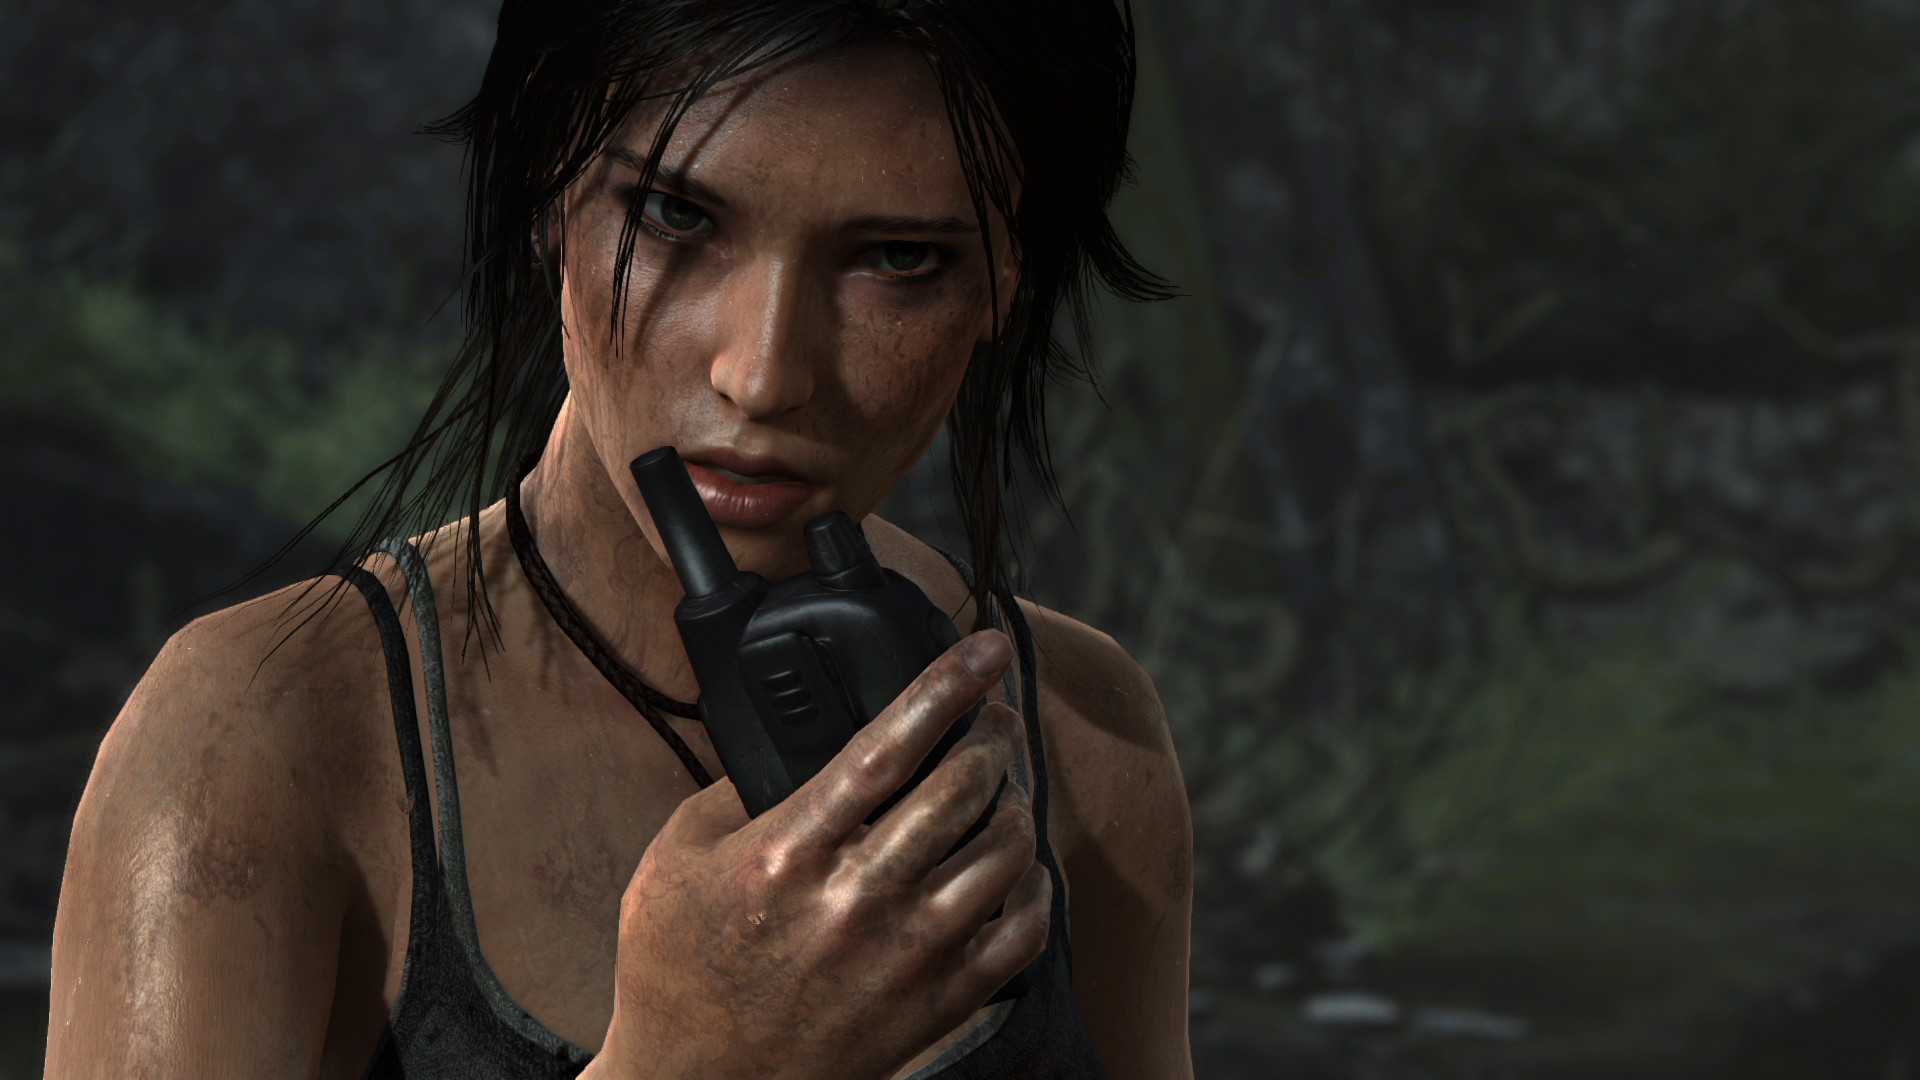 Tomb raider for steam фото 25